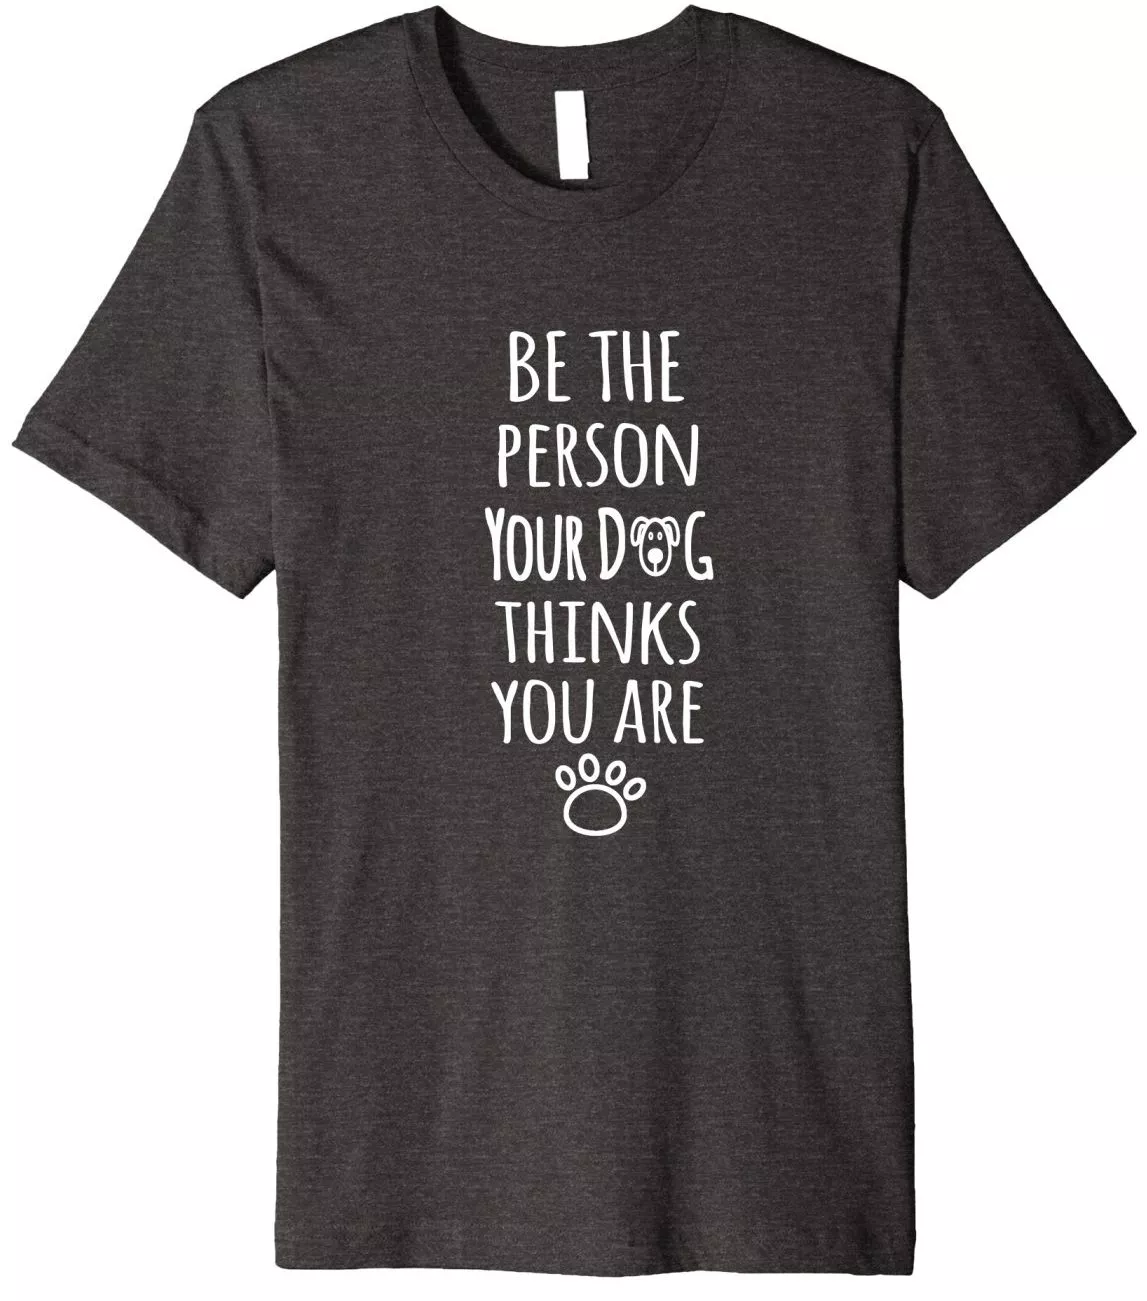 2018 Gift For Dog Lover: Be the Person Your Dog Thinks You Are T-Shirt 2024